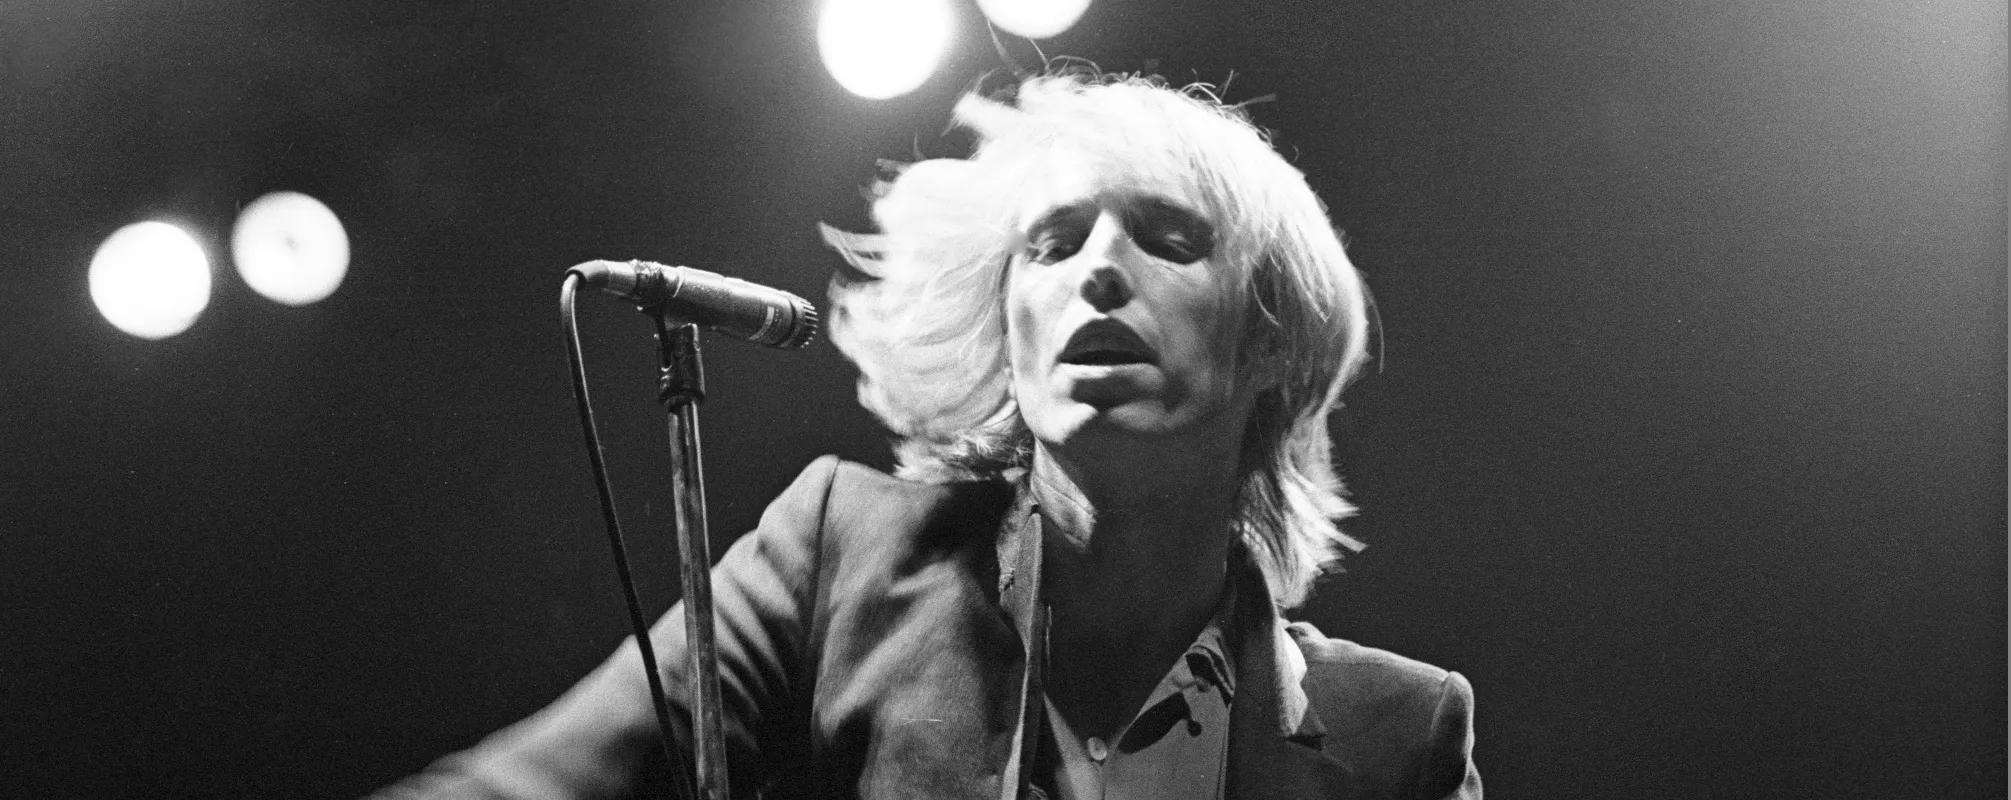 Behind the Metaphysical Meaning of “Learning to Fly” by Tom Petty and the Heartbreakers